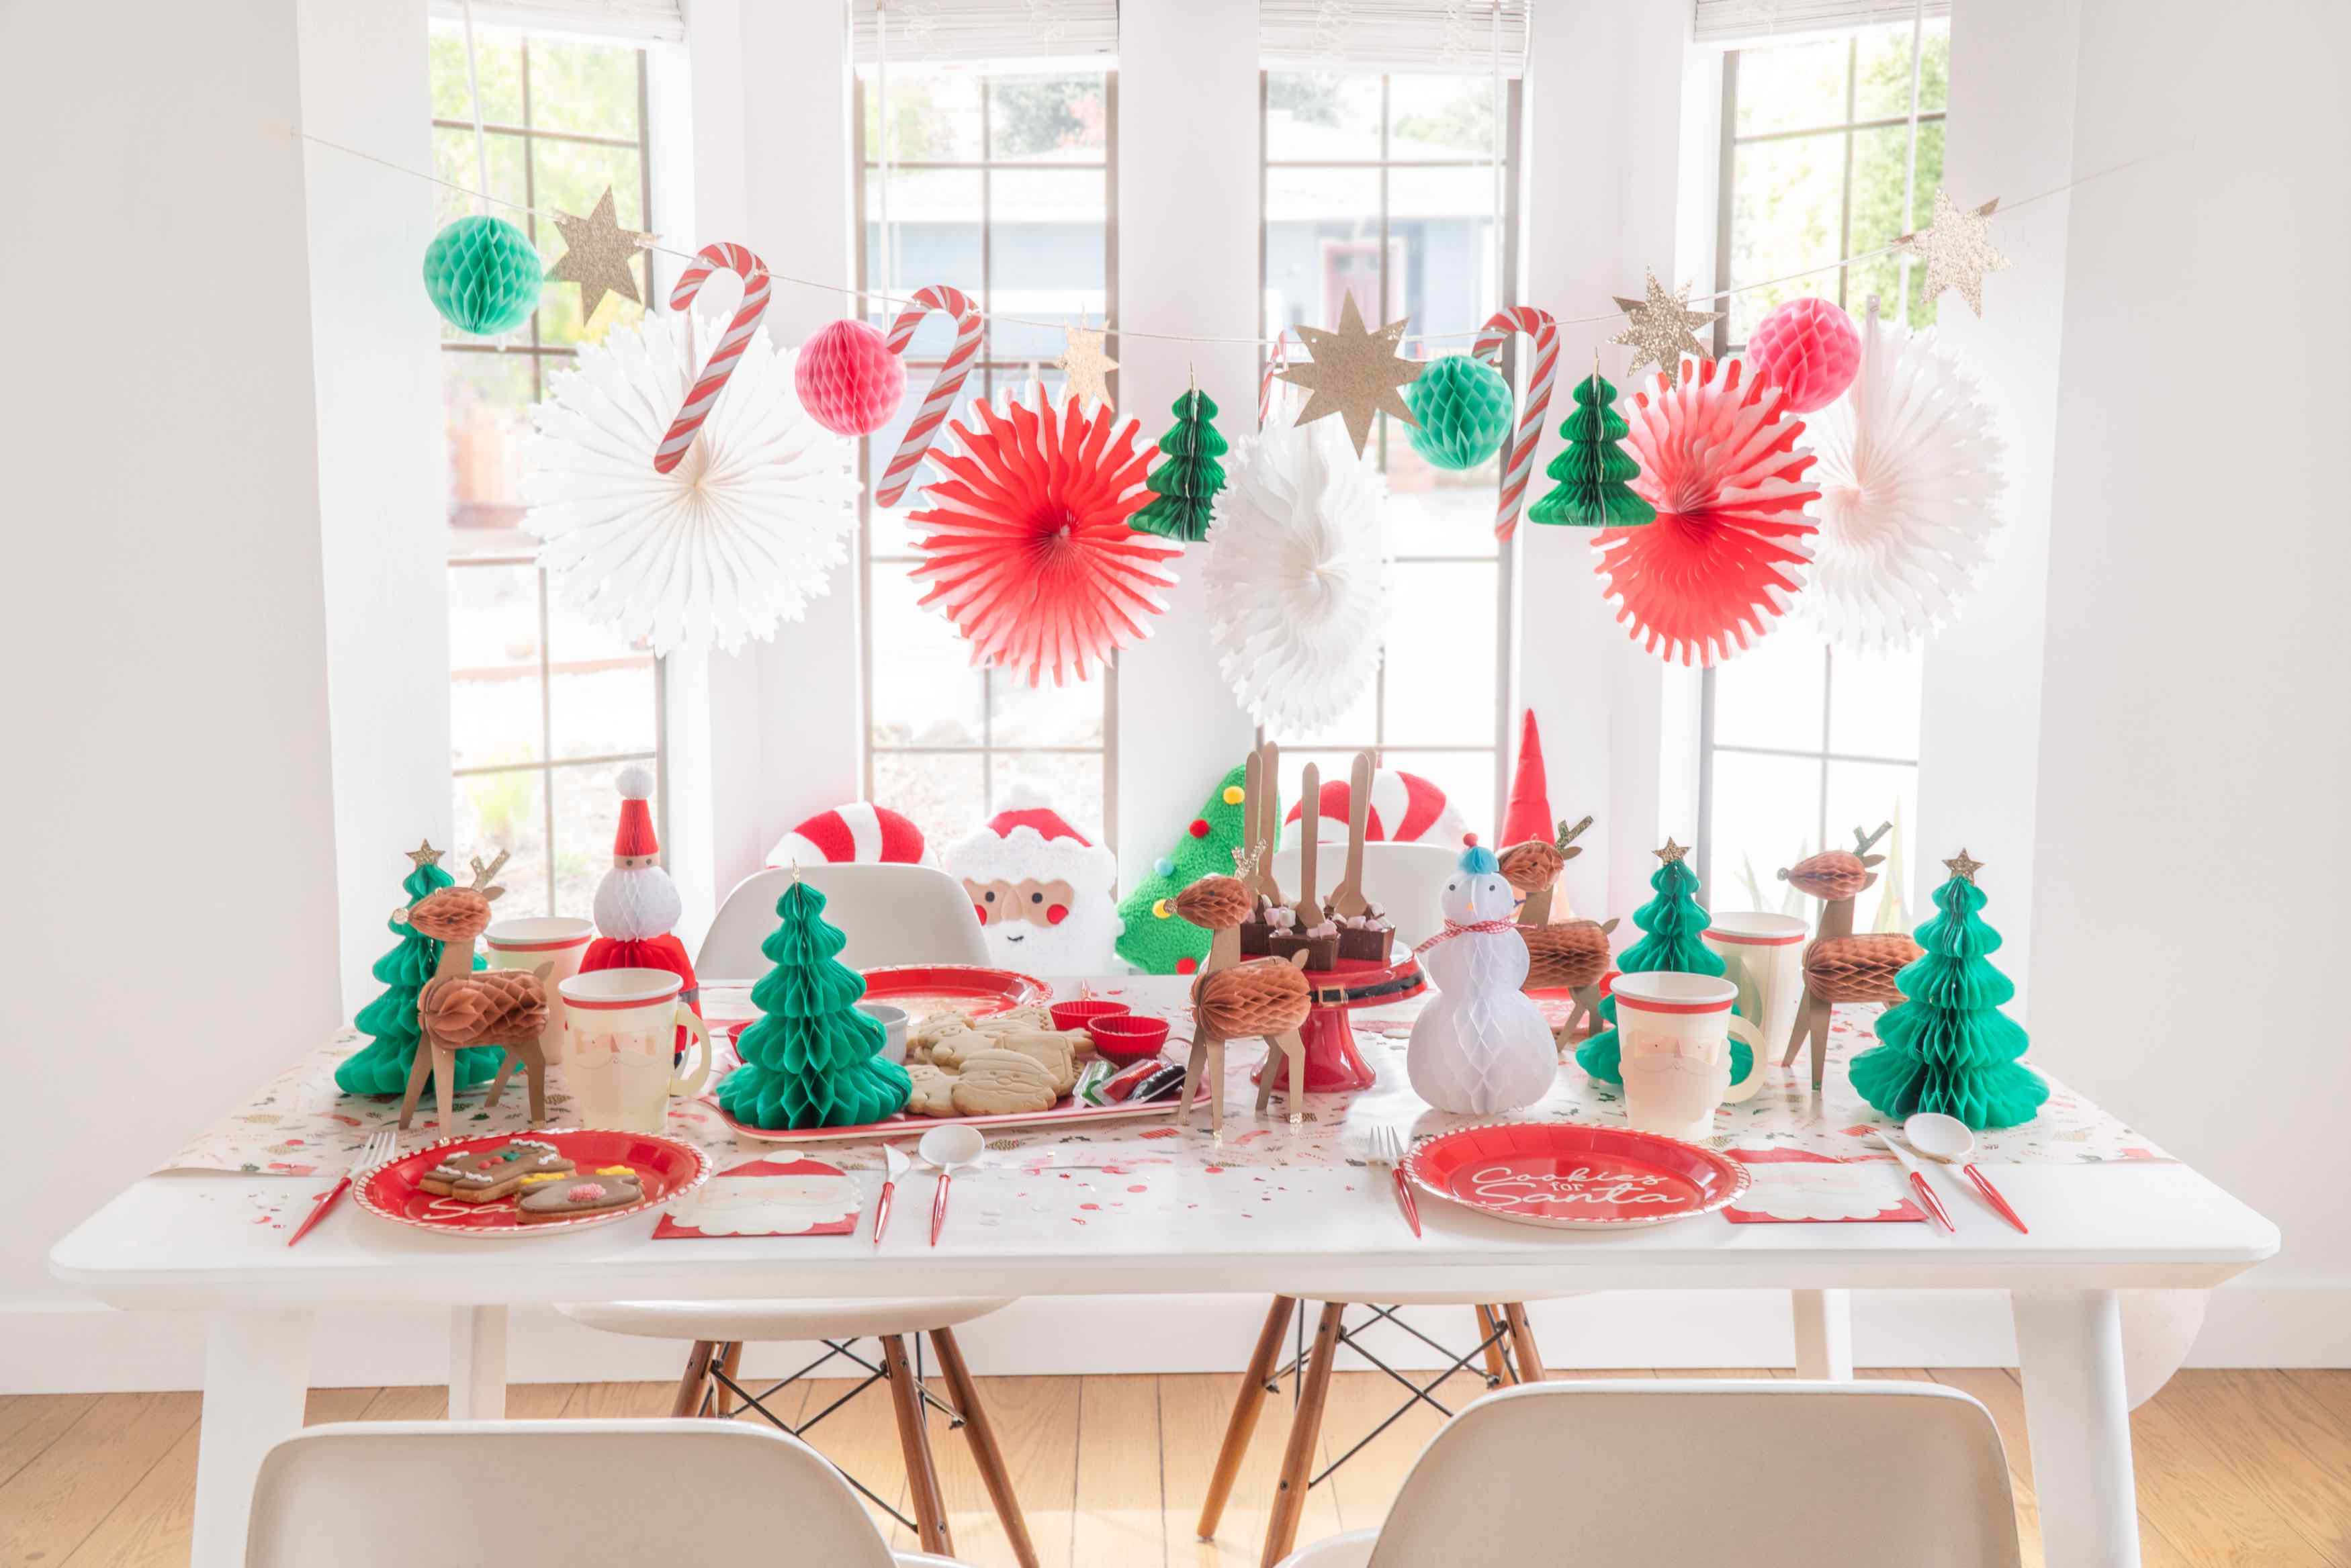 How to host a Christmas cookie decorating party for kids by Momo Party featuring festive Christmas honeycomb garland with candy canes, peppermints, Christmas trees hung next to the windows. On the table are Christmas character honeycombs with Santa.